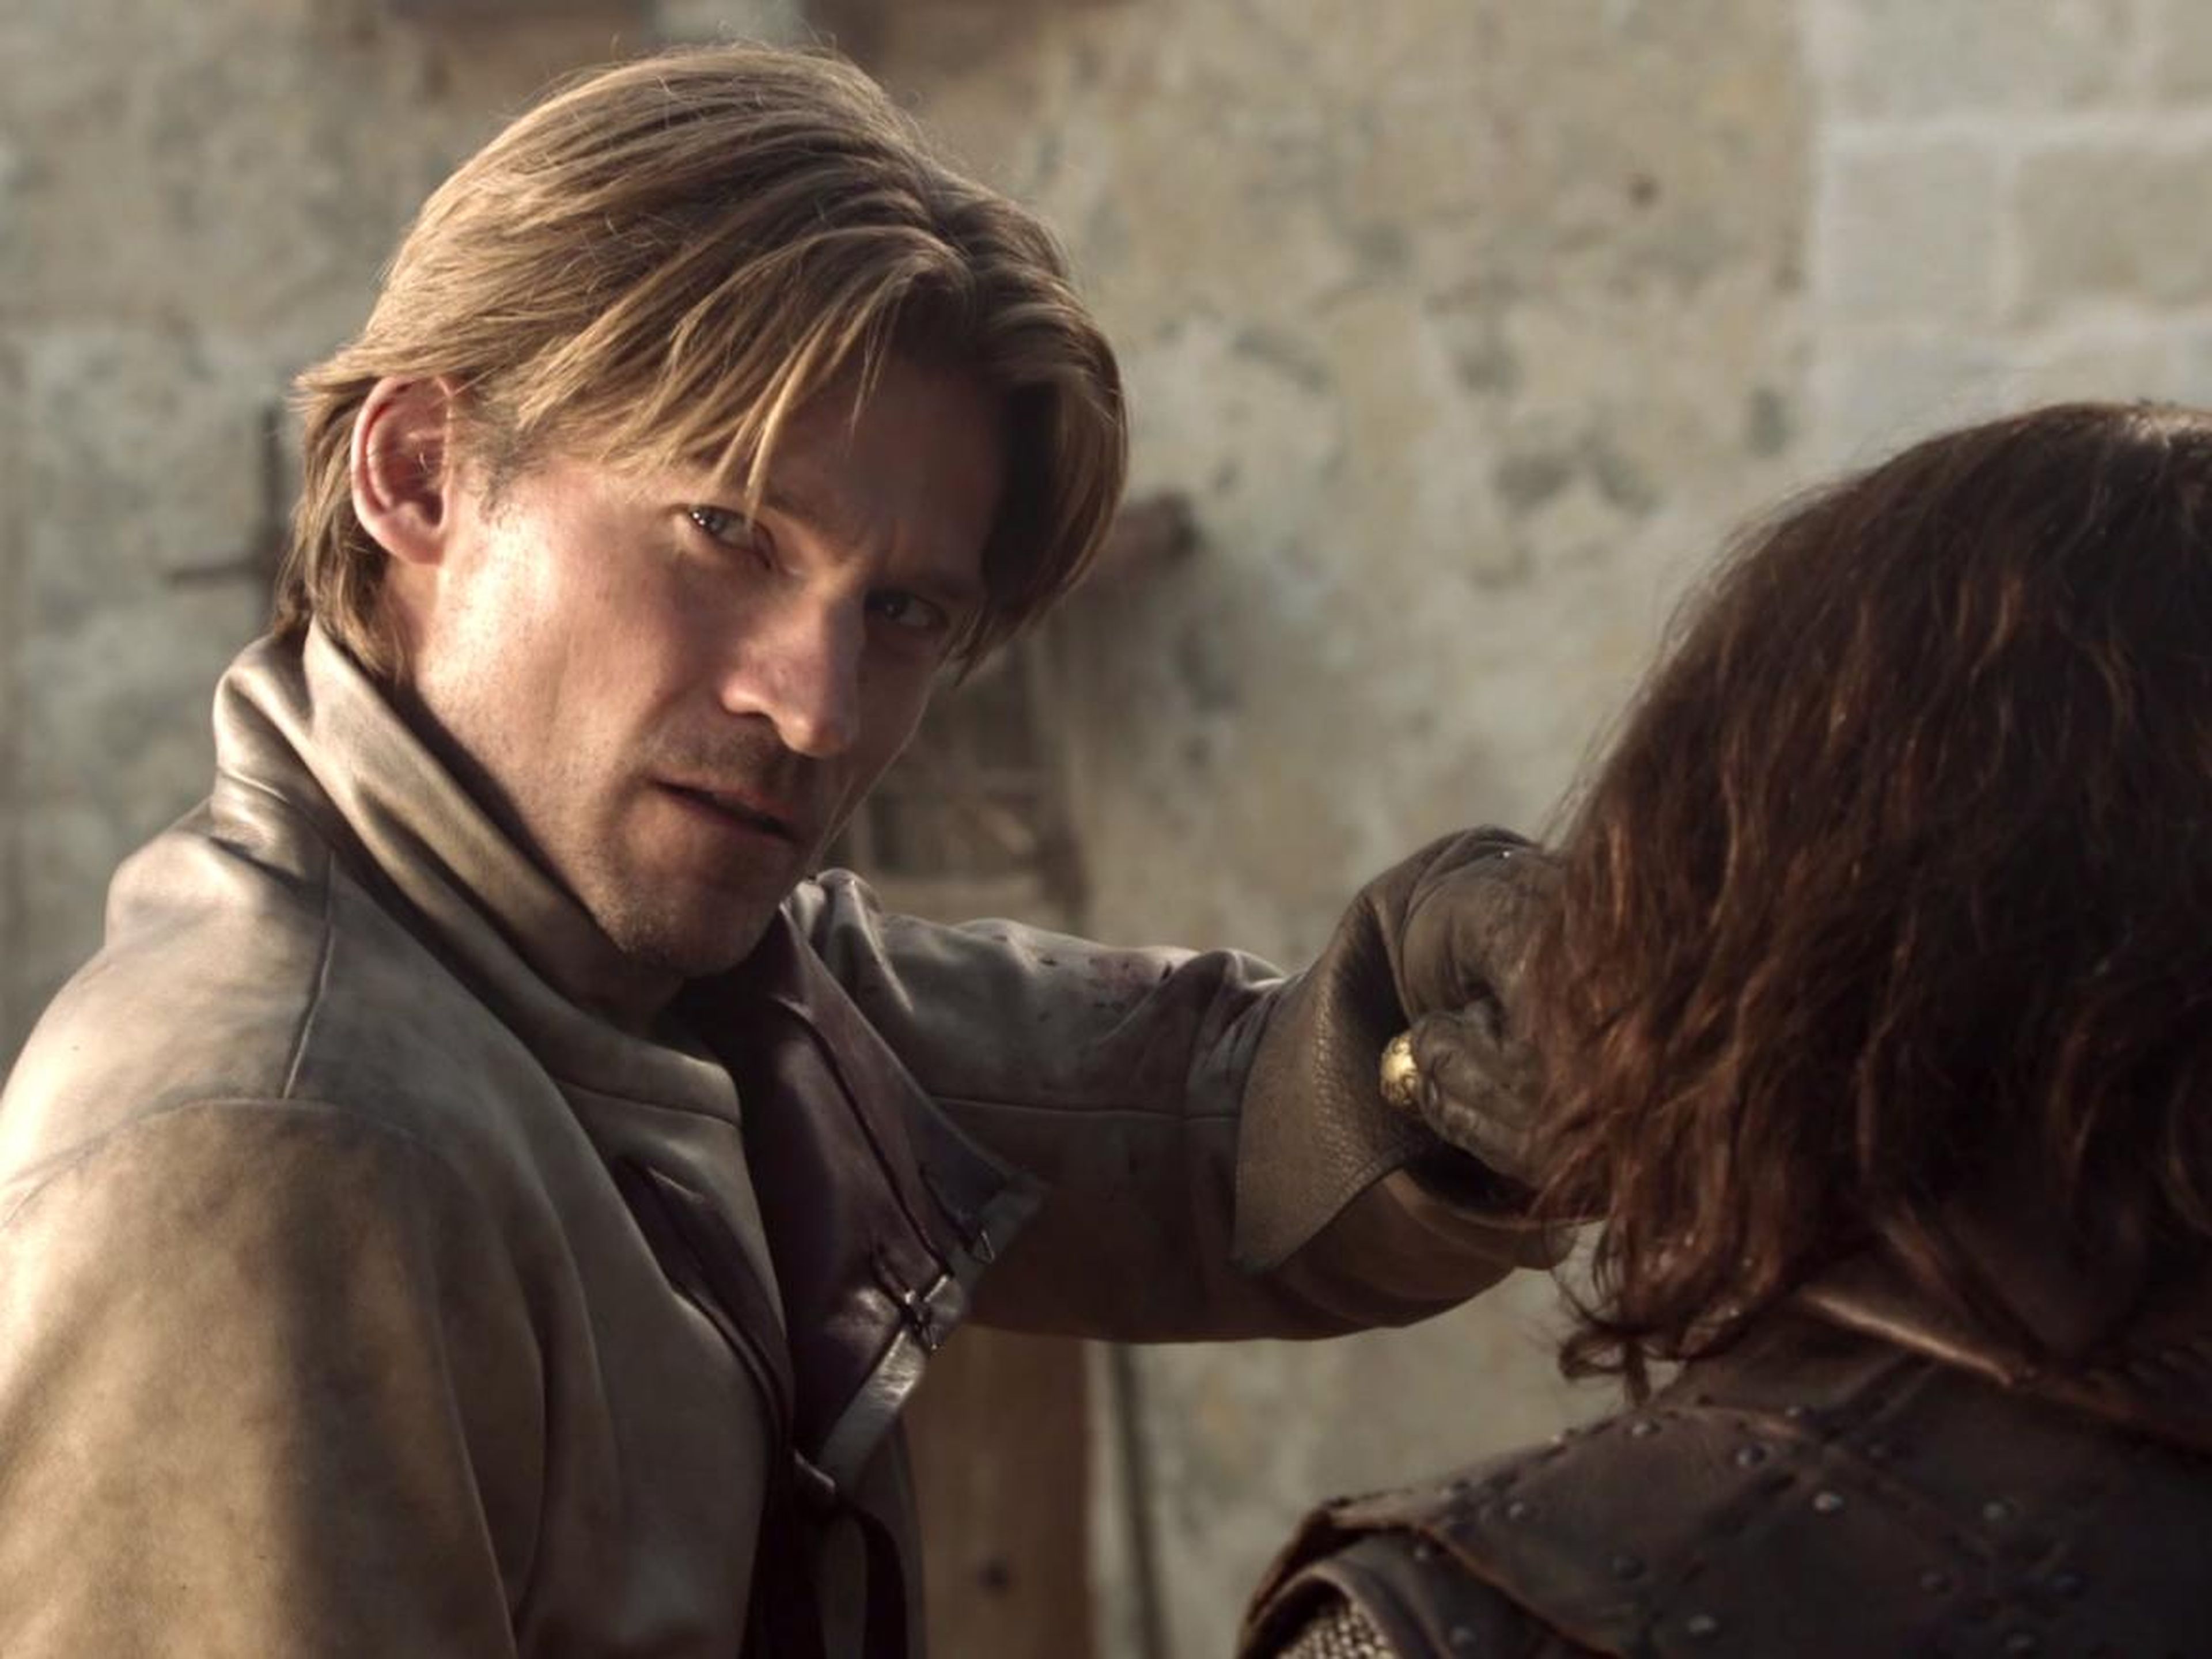 Jaime killing Jory as he stares at Ned Stark on season one, episode five, "The Wolf and the Lion."